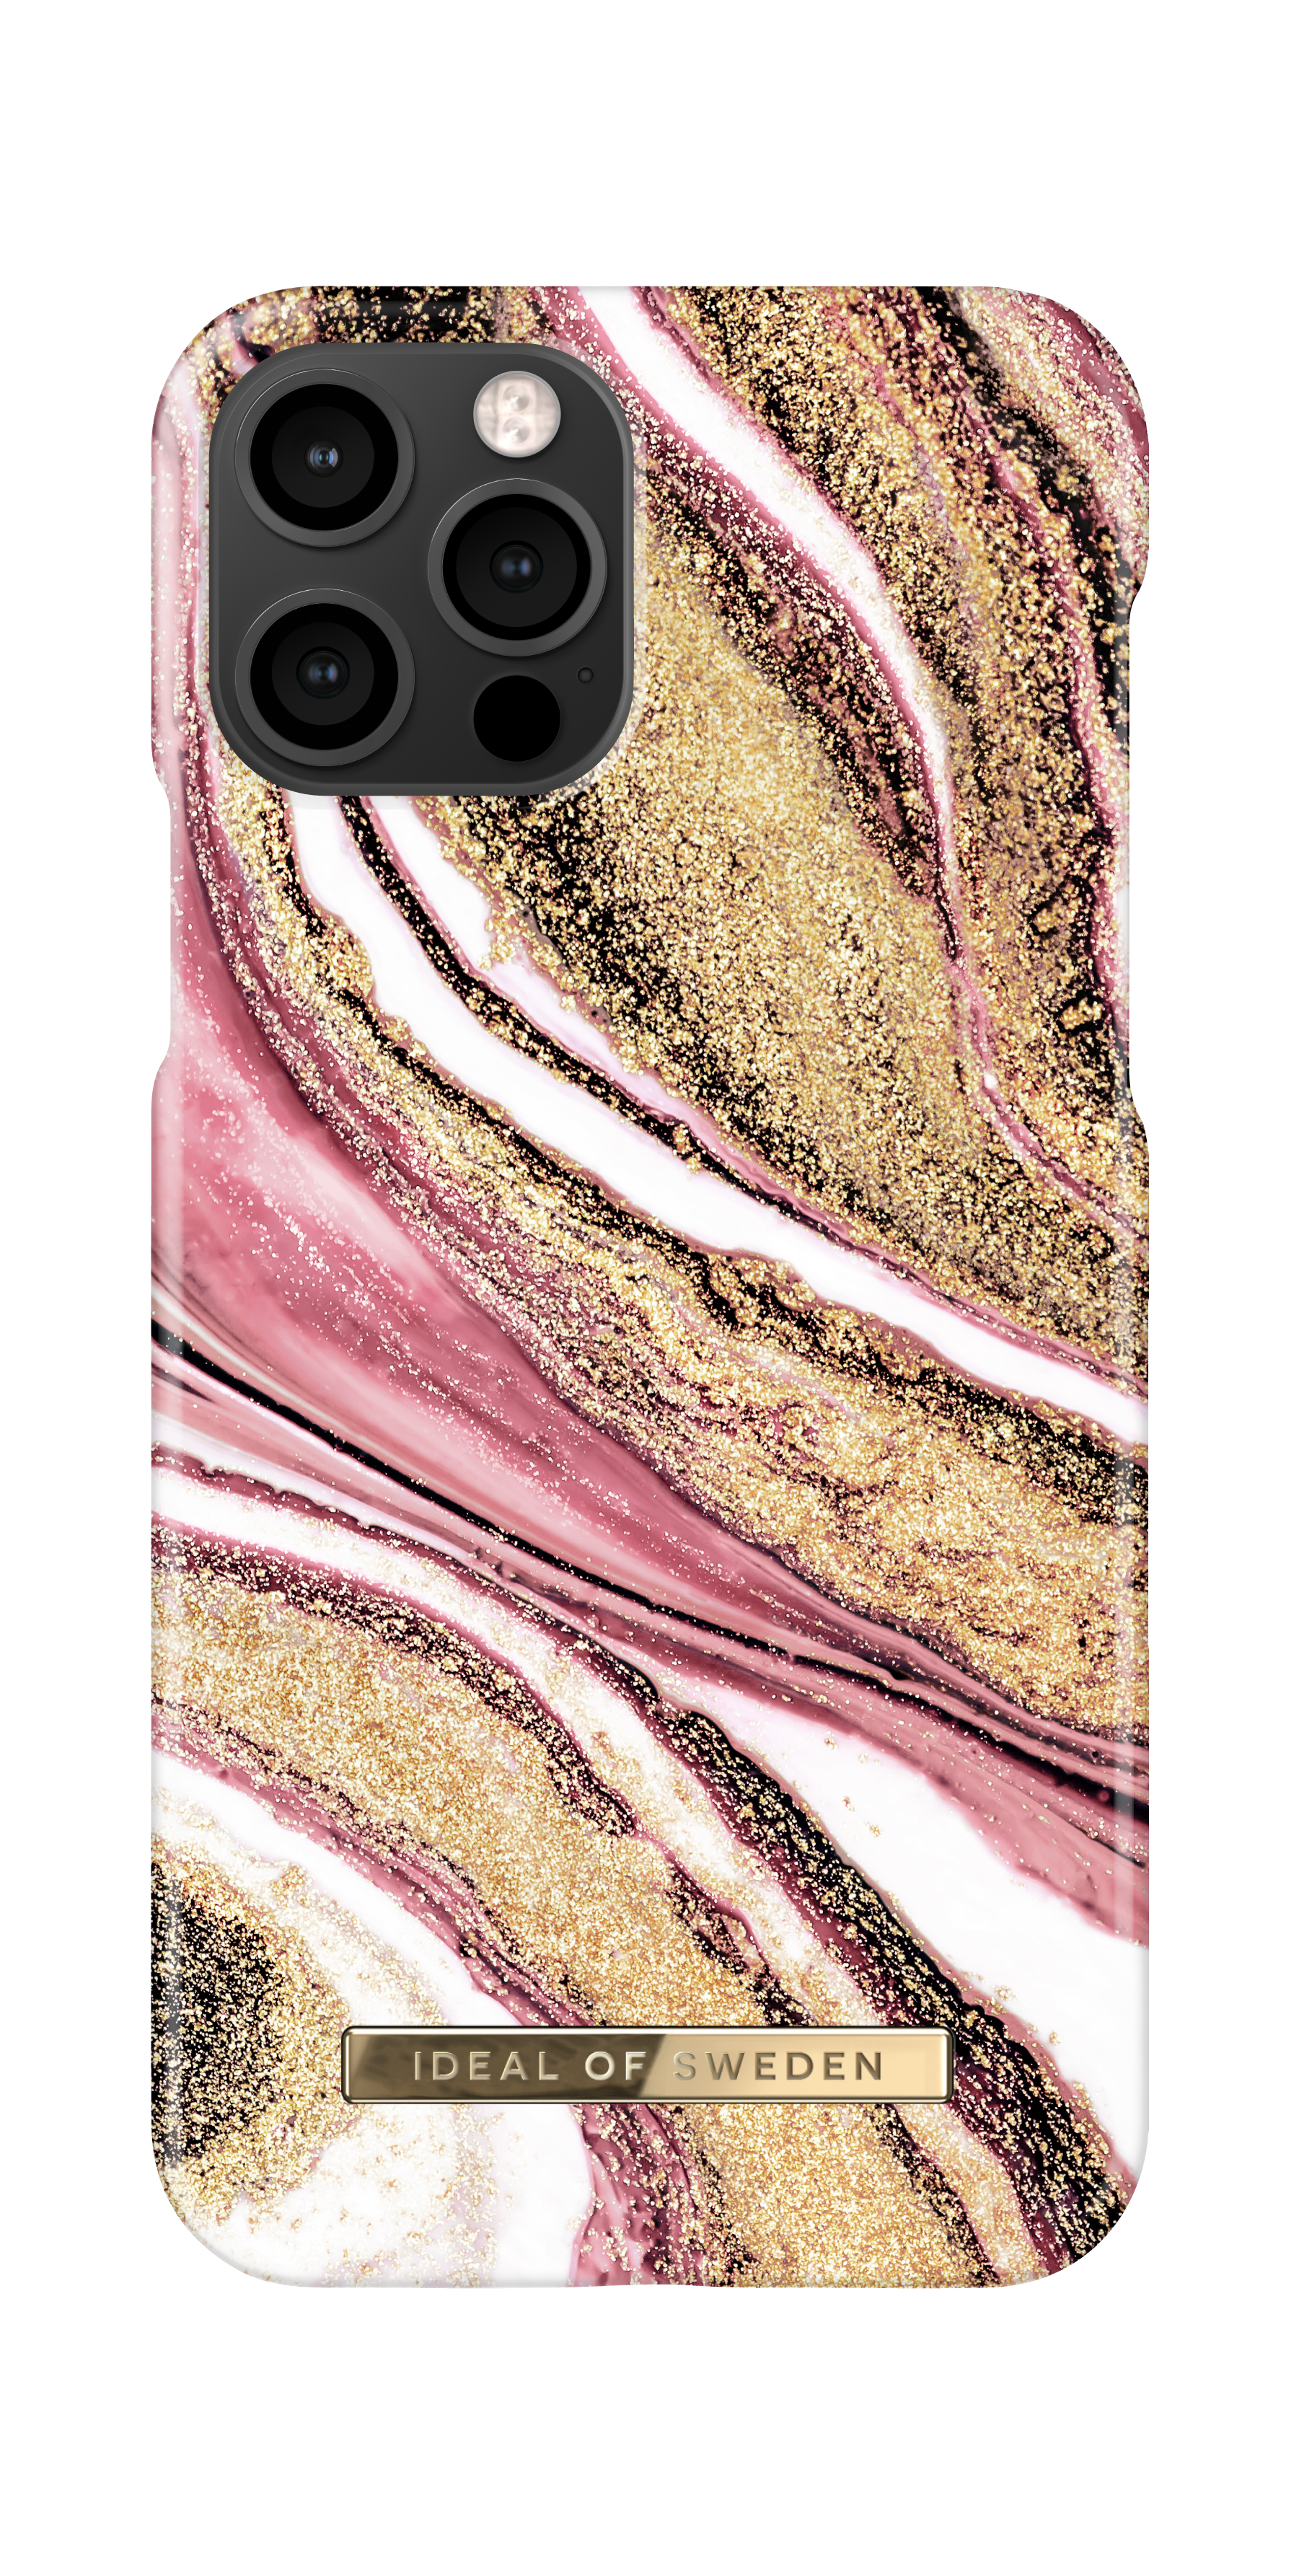 Apple, iPhone Cosmic iPhone OF Pink Swirl Backcover, SWEDEN Pro, IDFCSS20-I2061-193, IDEAL 12, 12